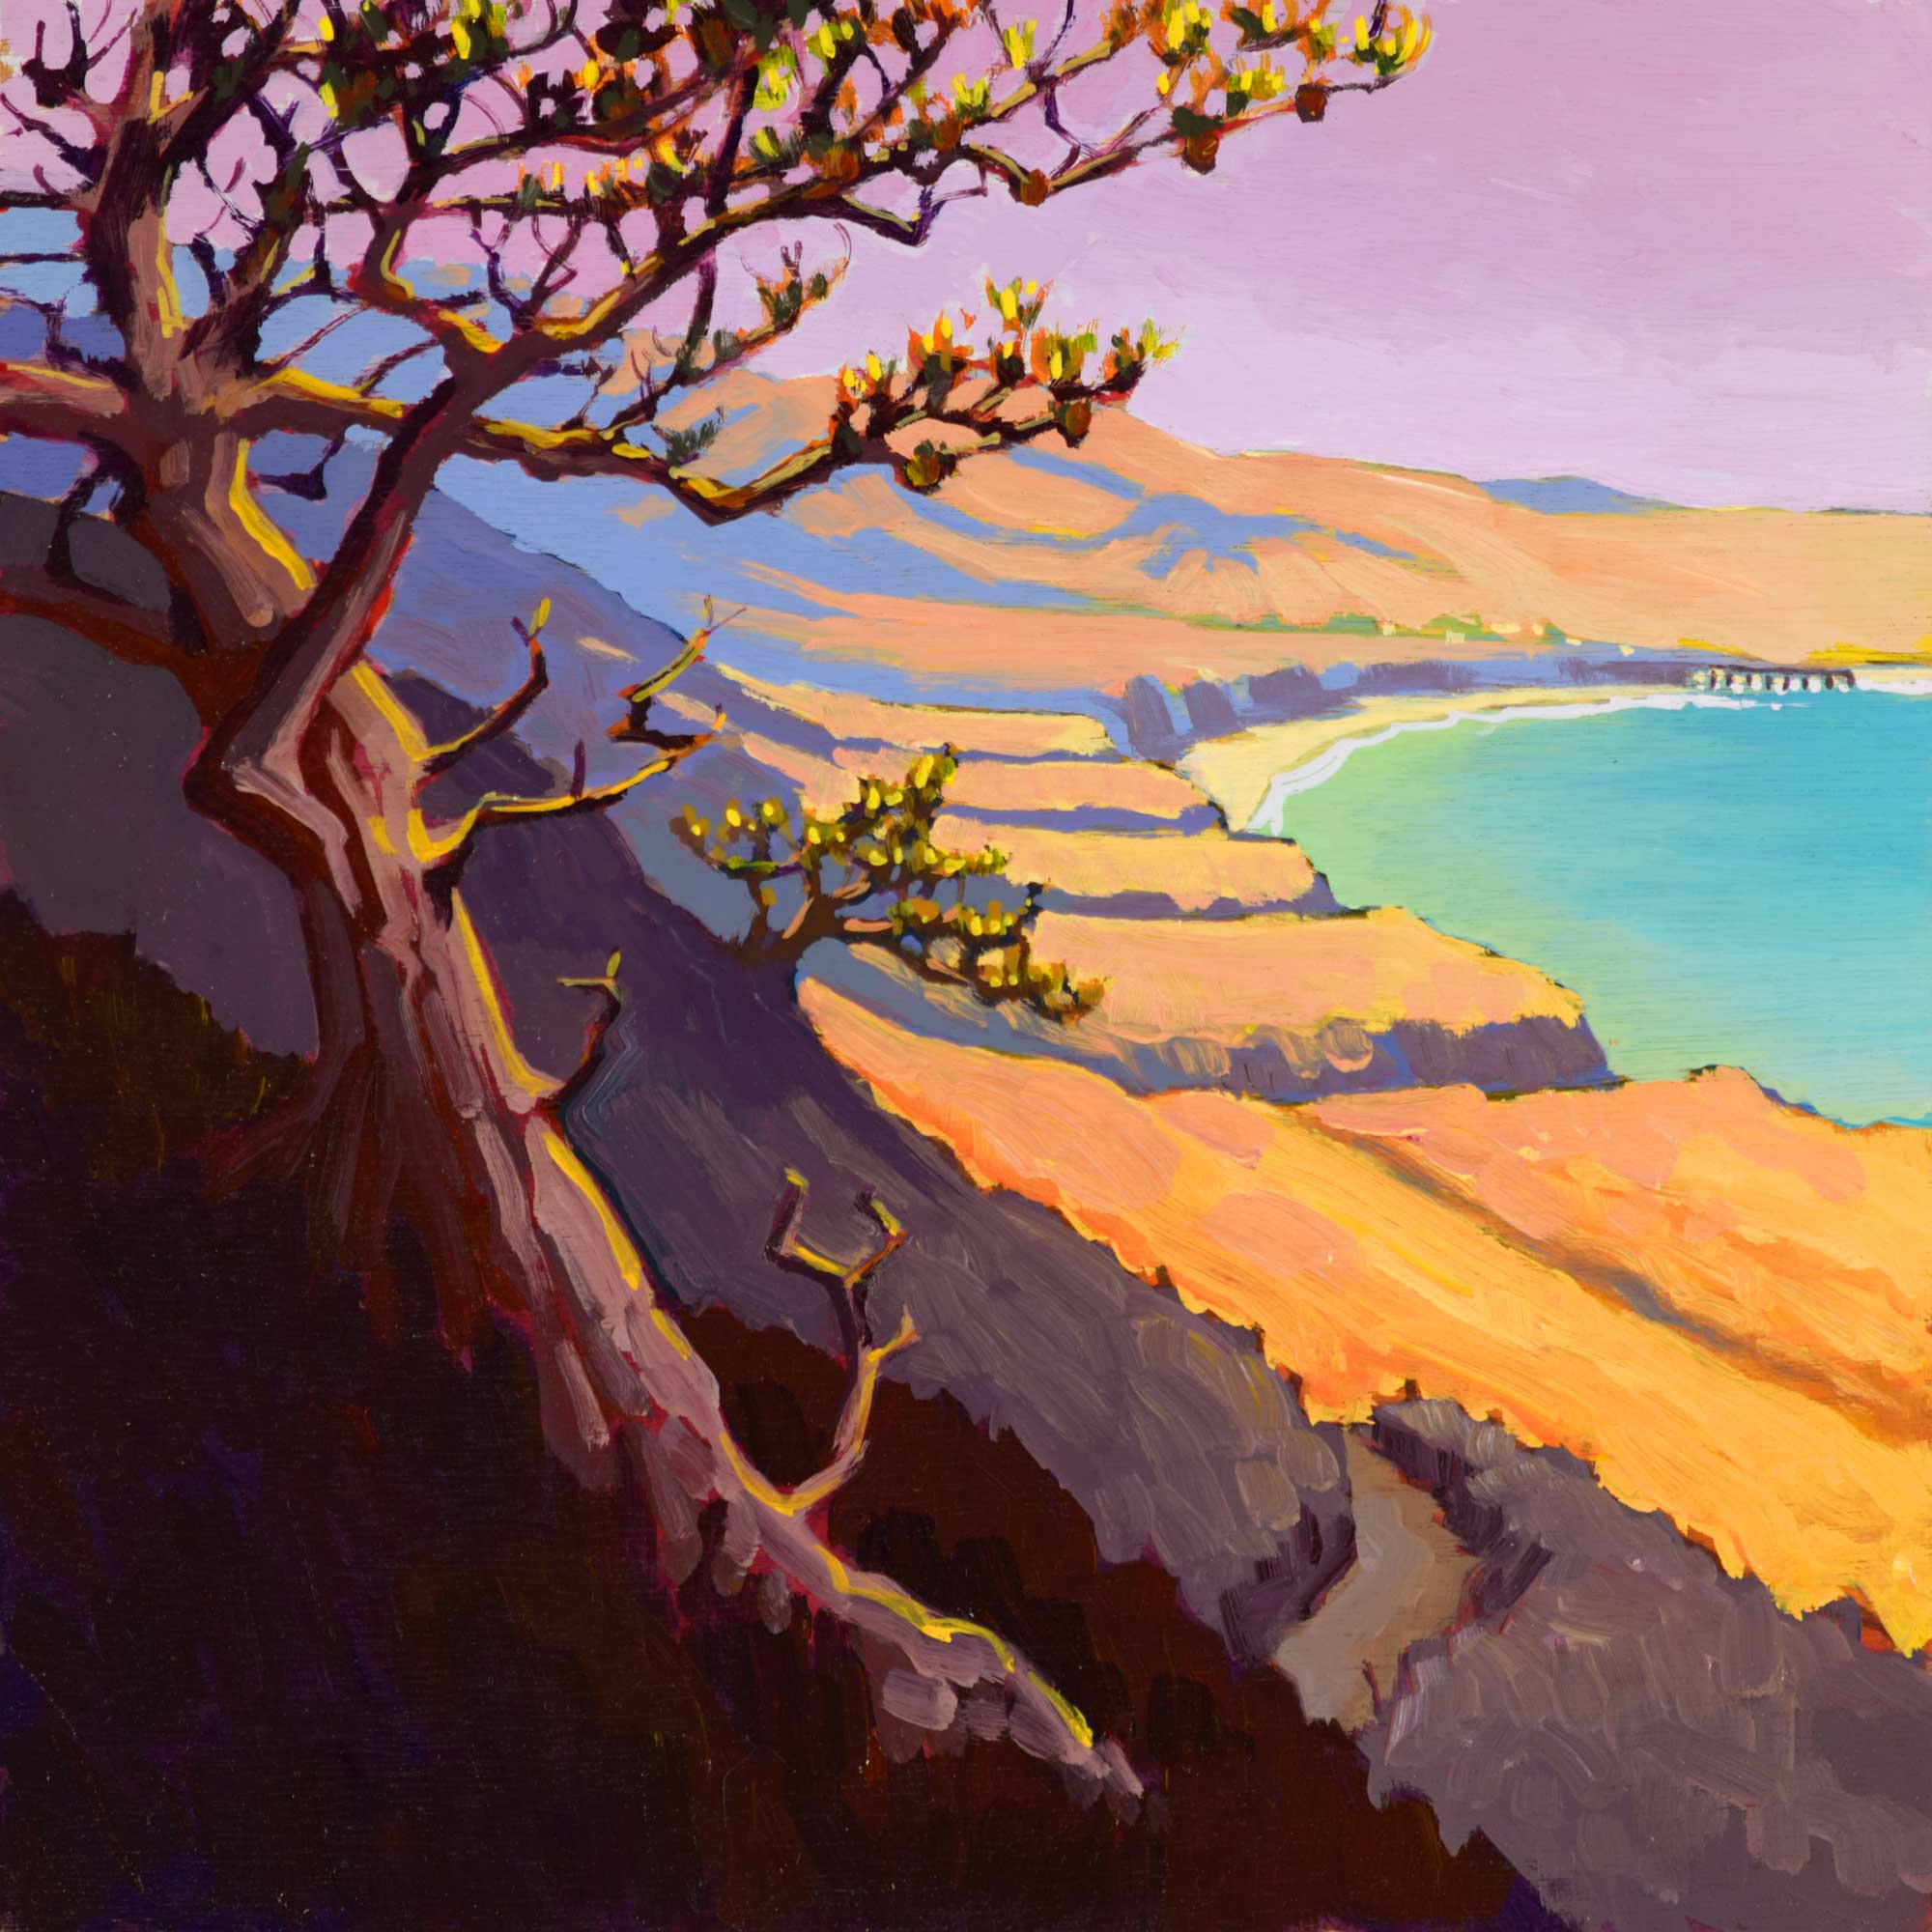 Plein air artwork of a torrey pine tree over Becher's Bay on Santa Rosa island off the coast of southern California